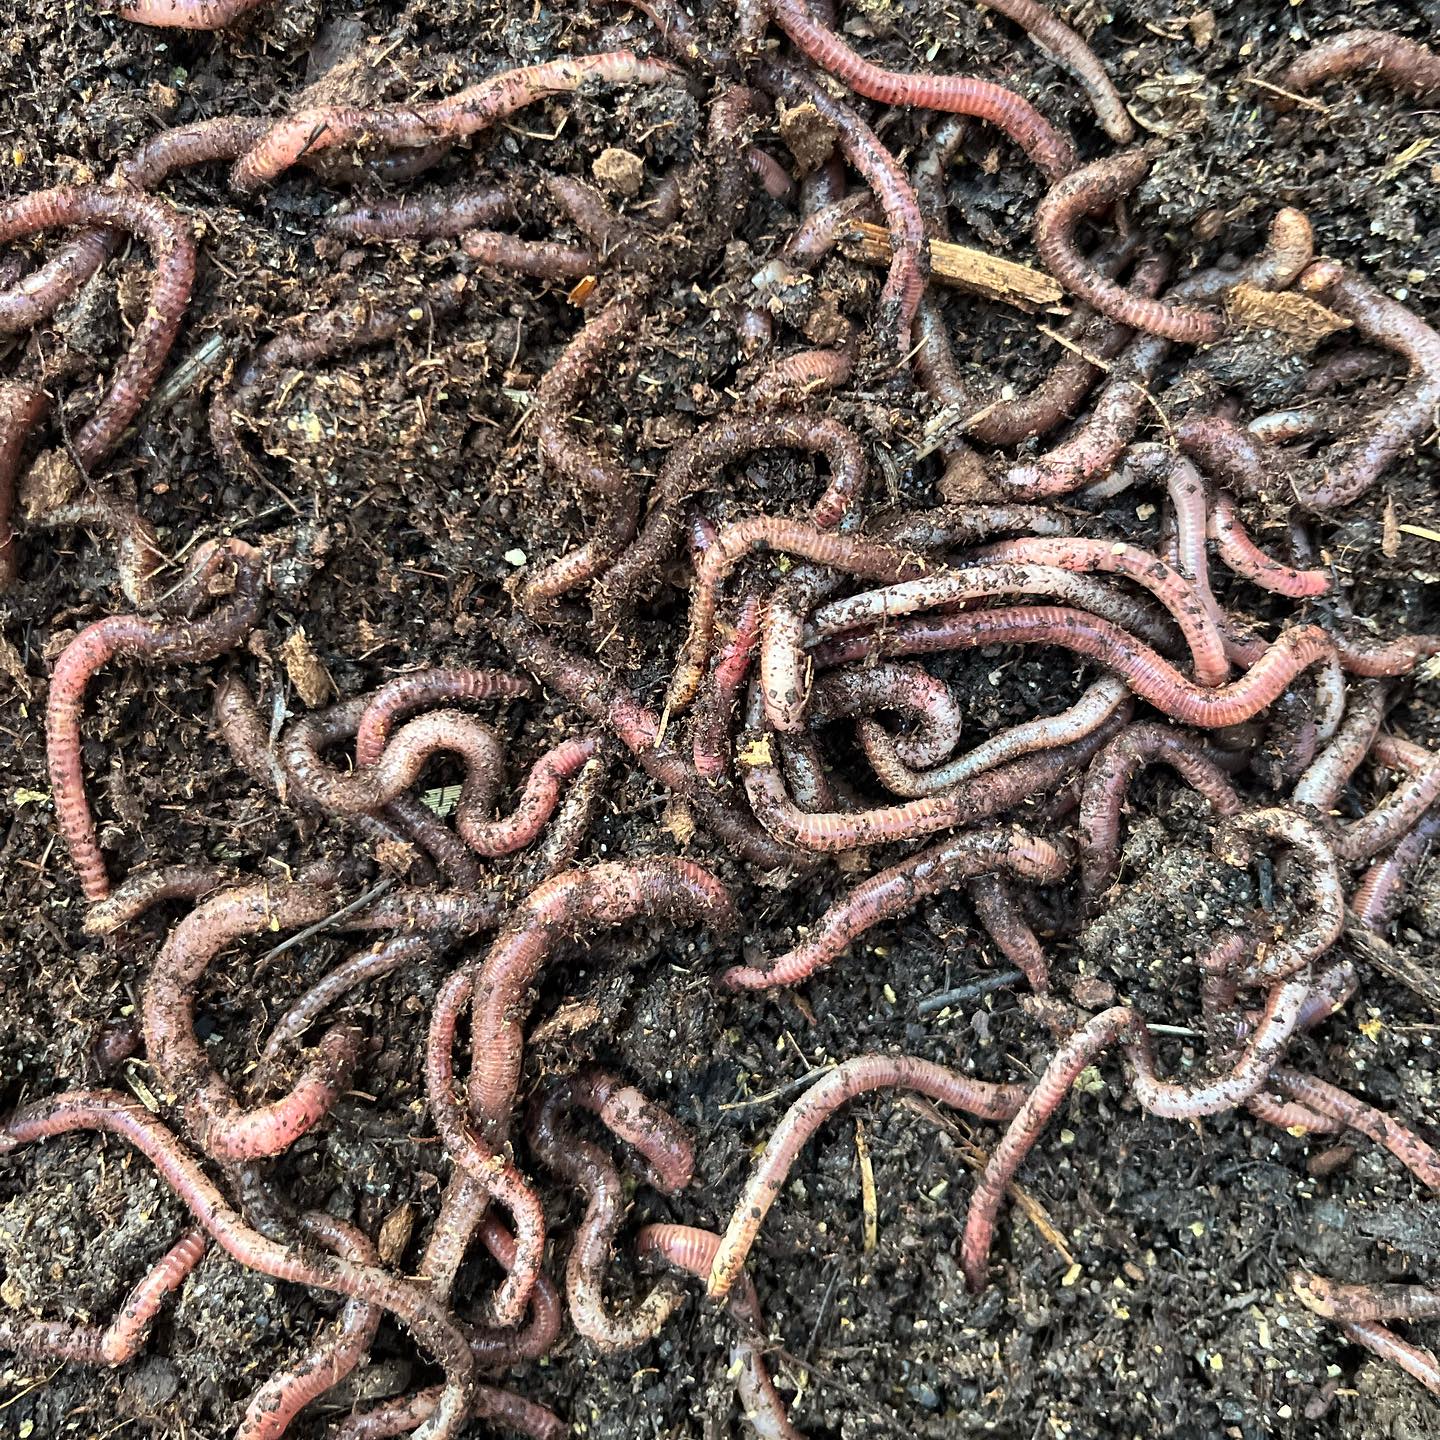 A bunch of worms in dirt